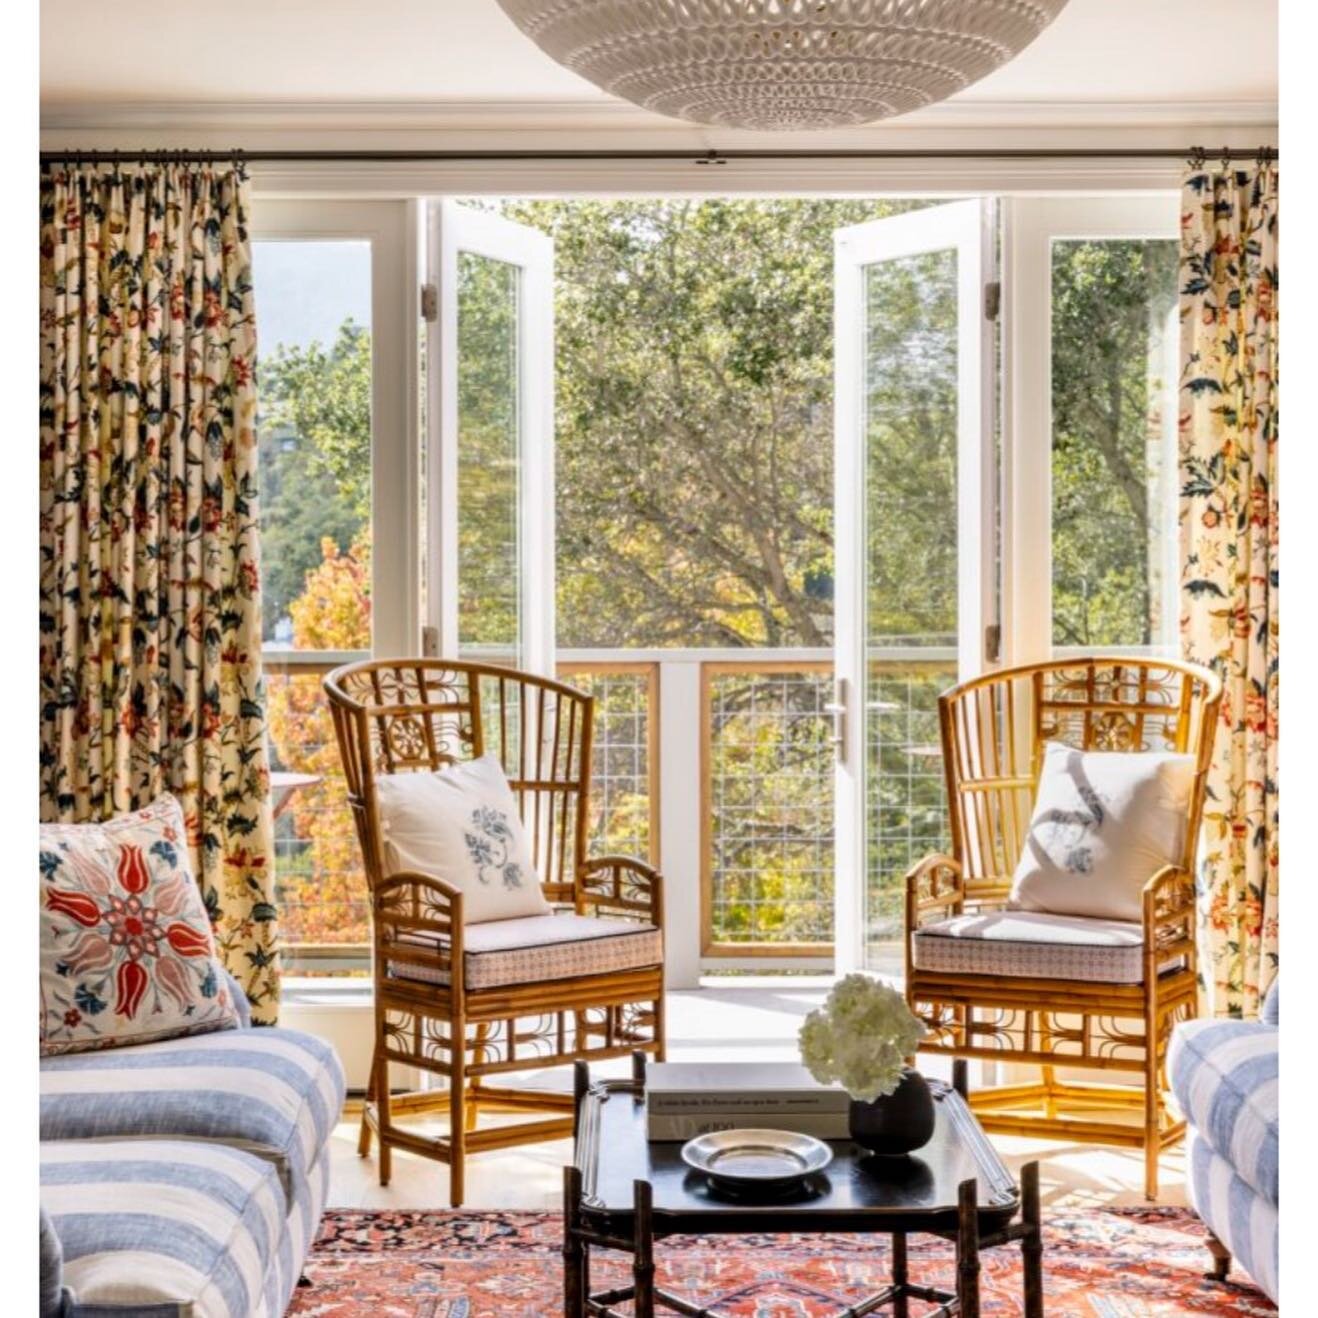 Featured on @sunsetmag! Colorful, and layered with fun pattern, loved styling this bungalow. 
Design by @courtneybsmith 
📷 @alannahale 
Words by @deanna.kizis